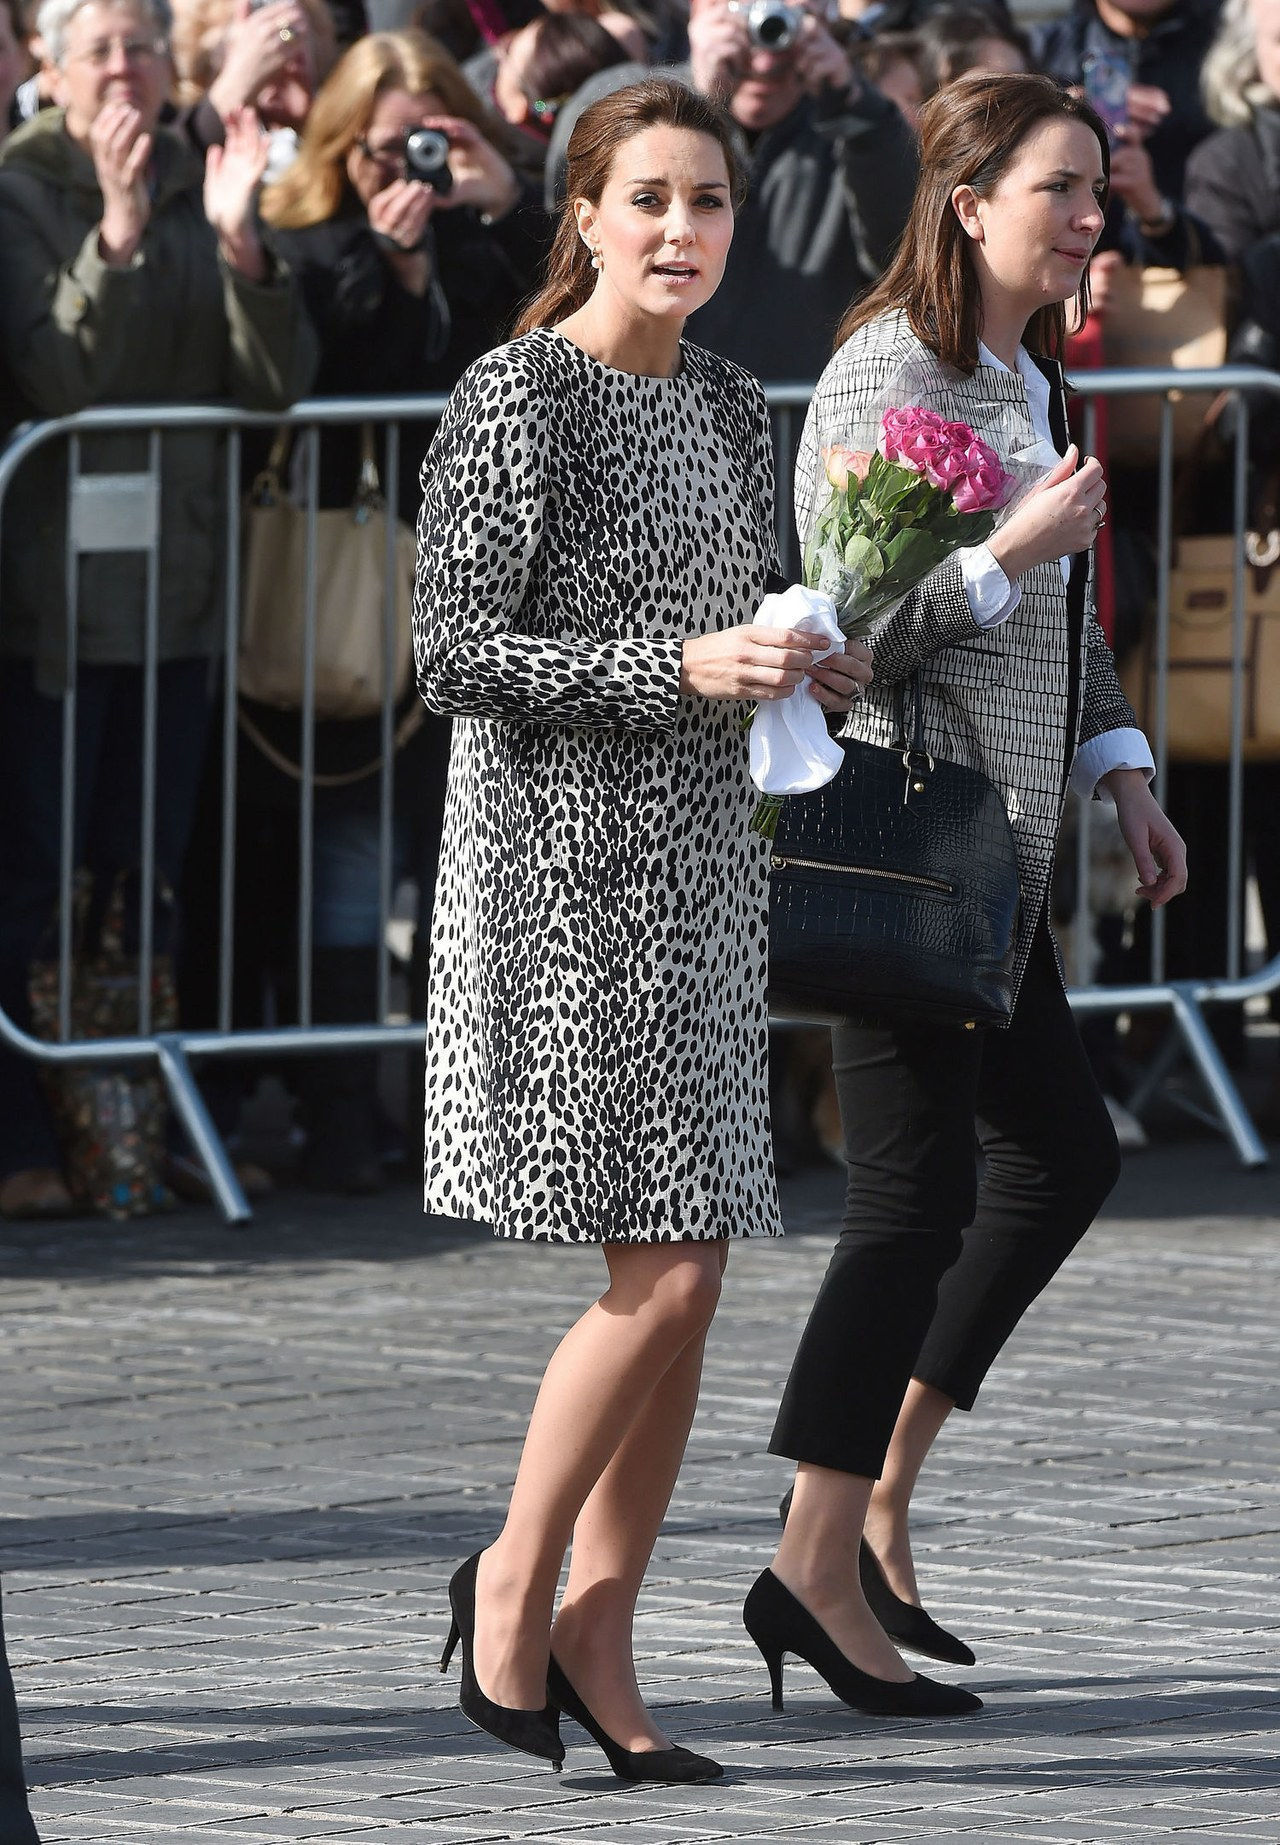 Rebecca deacon with kate middleton crop pants